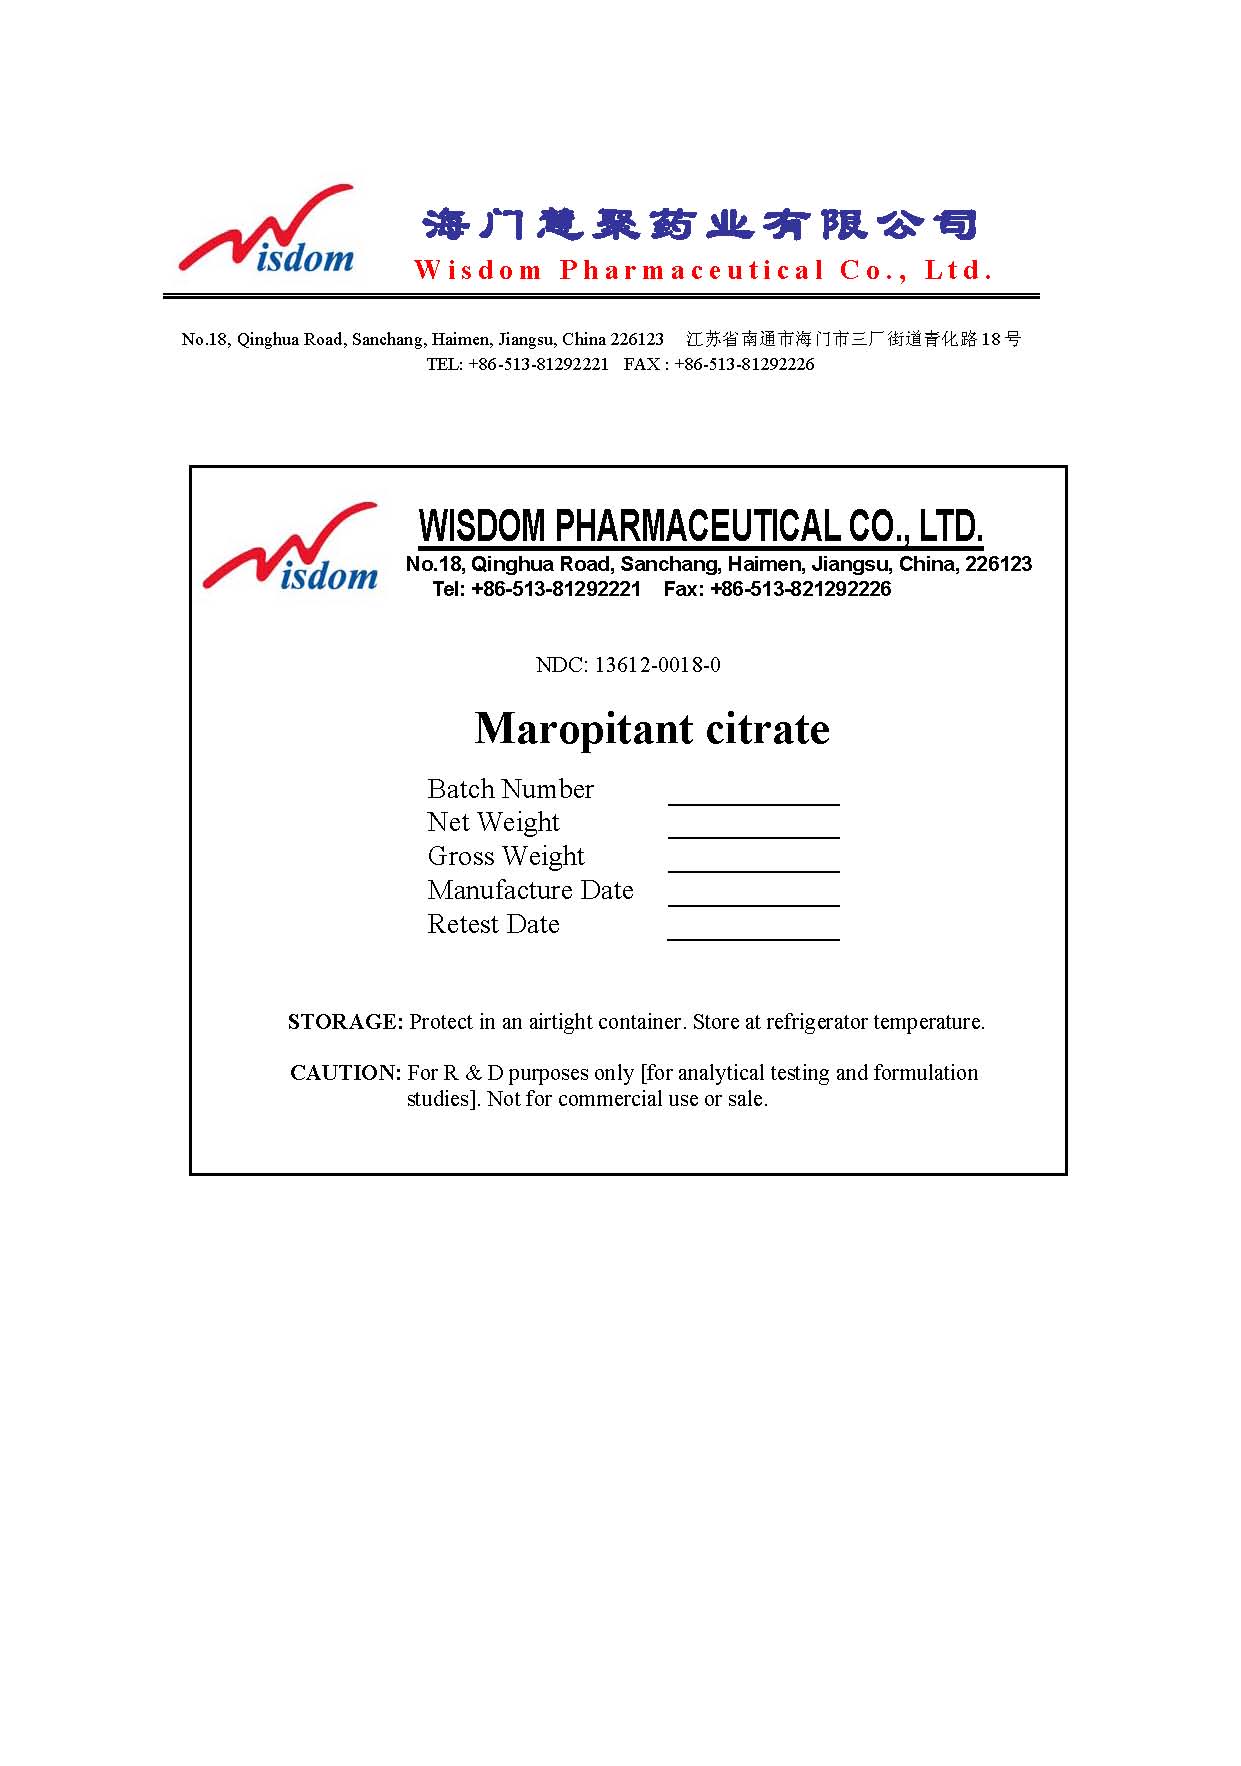 Image of Maropitant citrate 1kg Lable